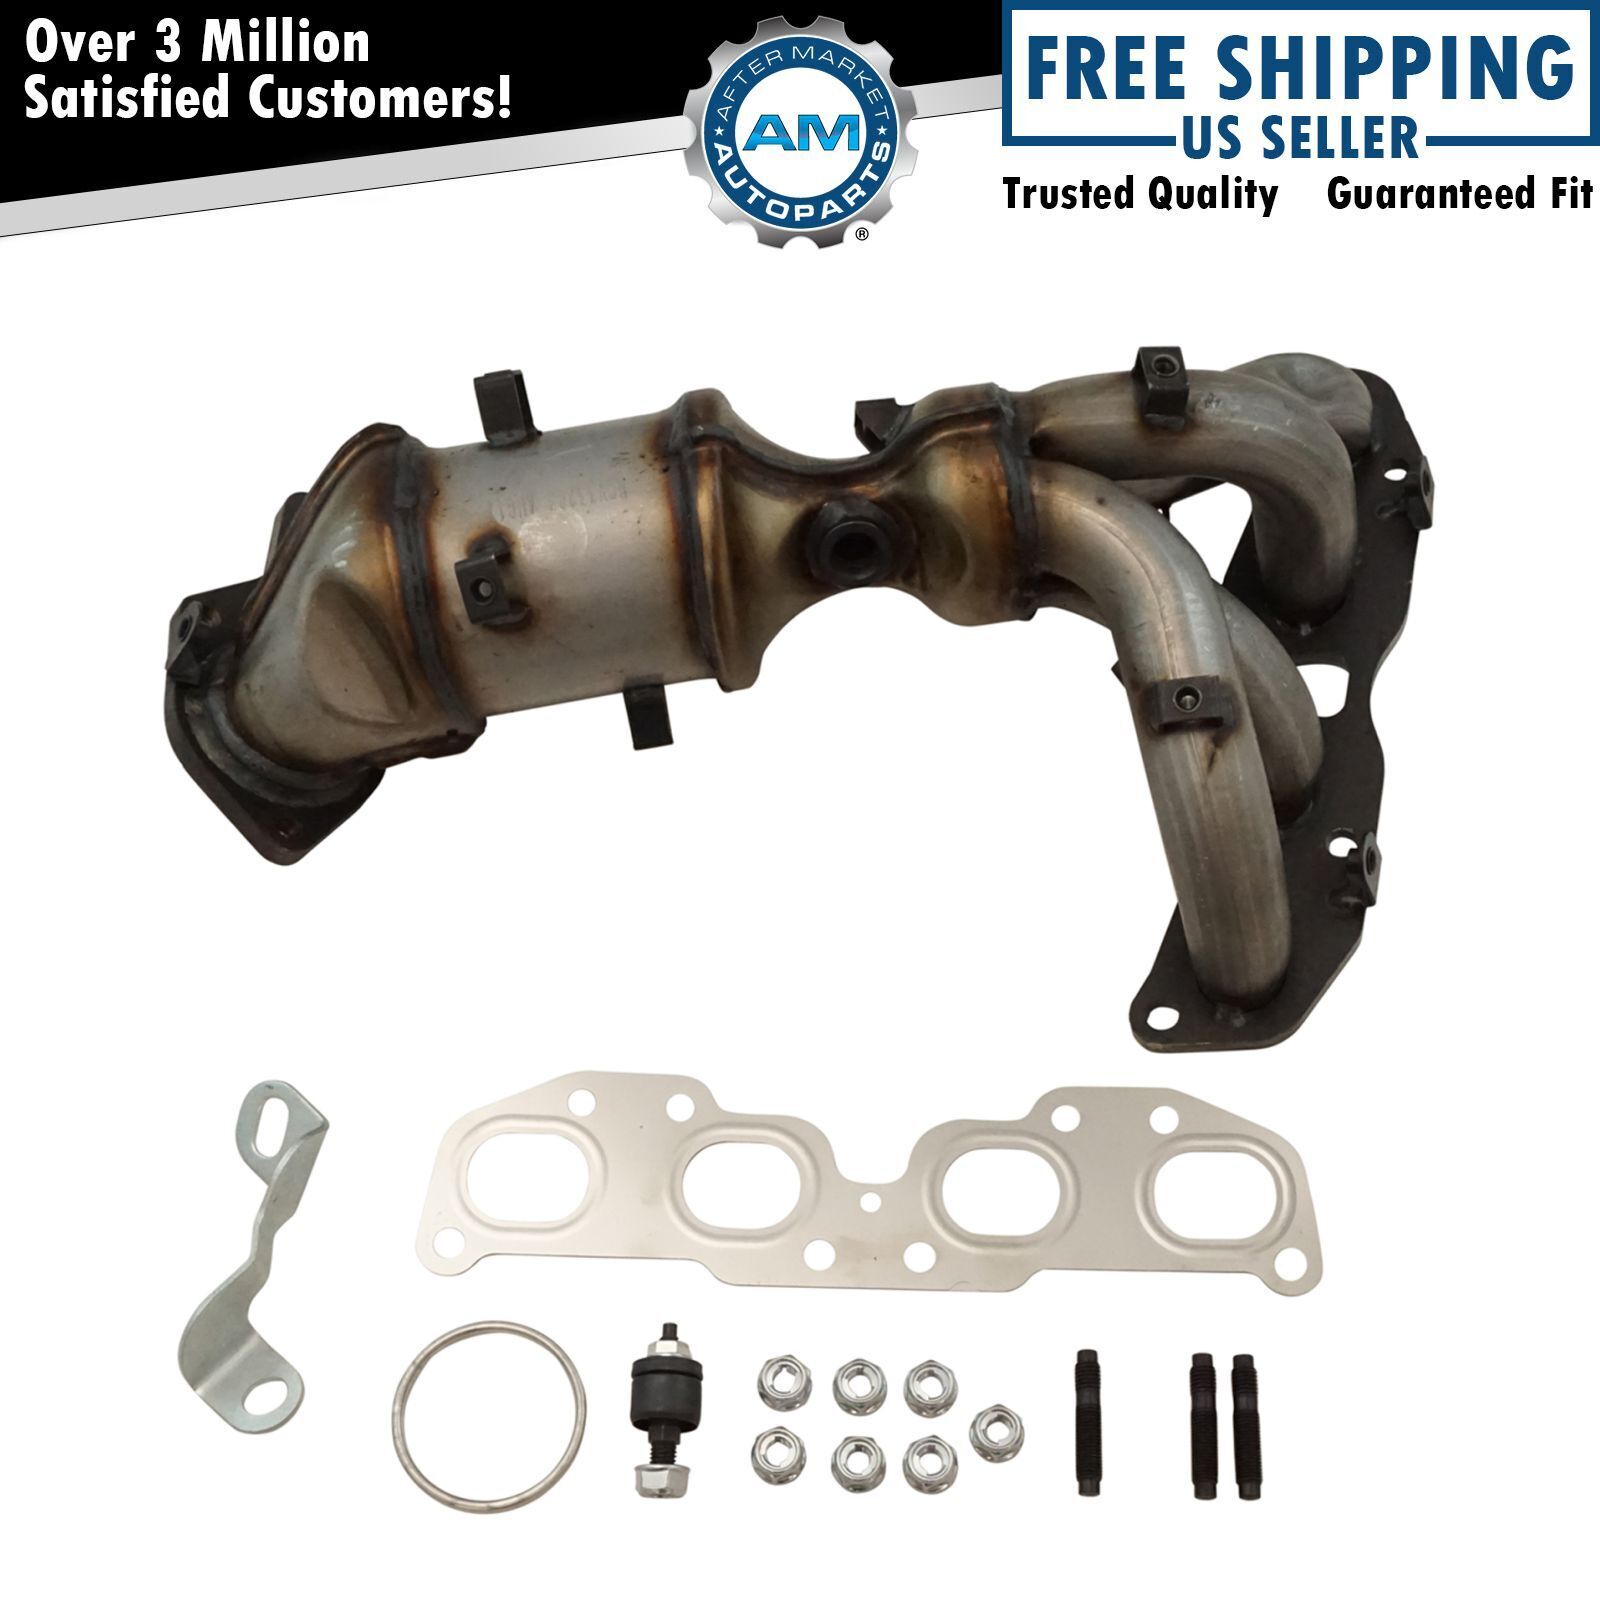 Exhaust Manifold Catalytic Converter Gasket Kit for 2007-2012 Nissan Altima